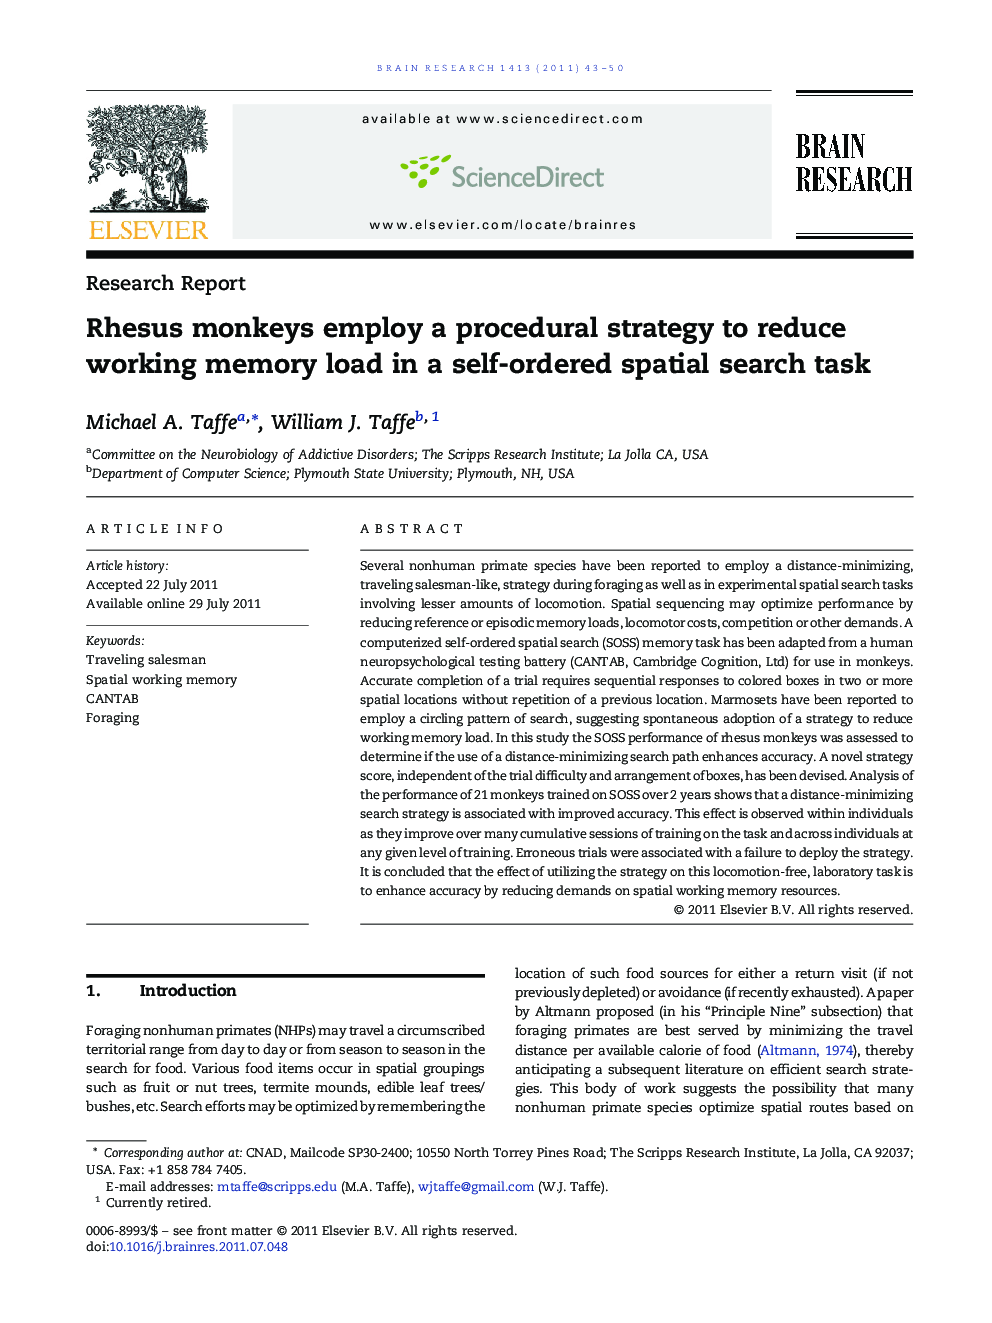 Research ReportRhesus monkeys employ a procedural strategy to reduce working memory load in a self-ordered spatial search task